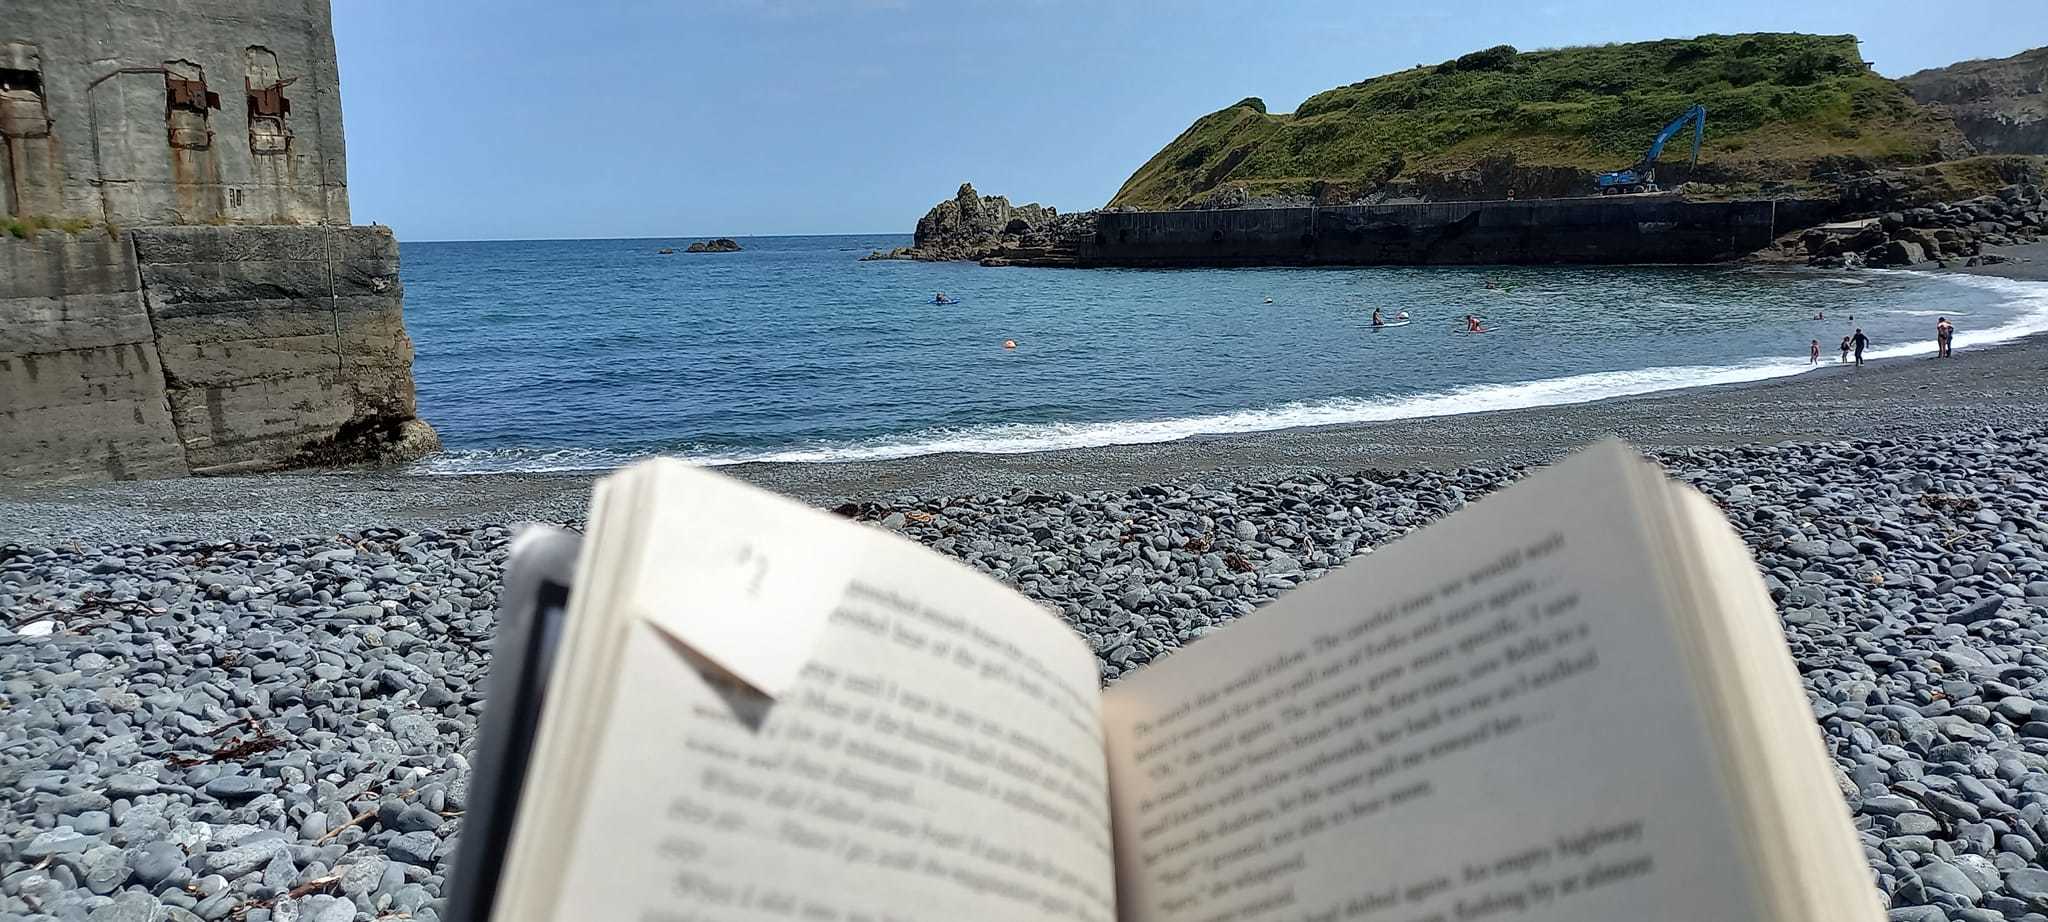 A book, the sound of waves and perfect views! What more could you want from a day at the beach, by Jo Thornhill